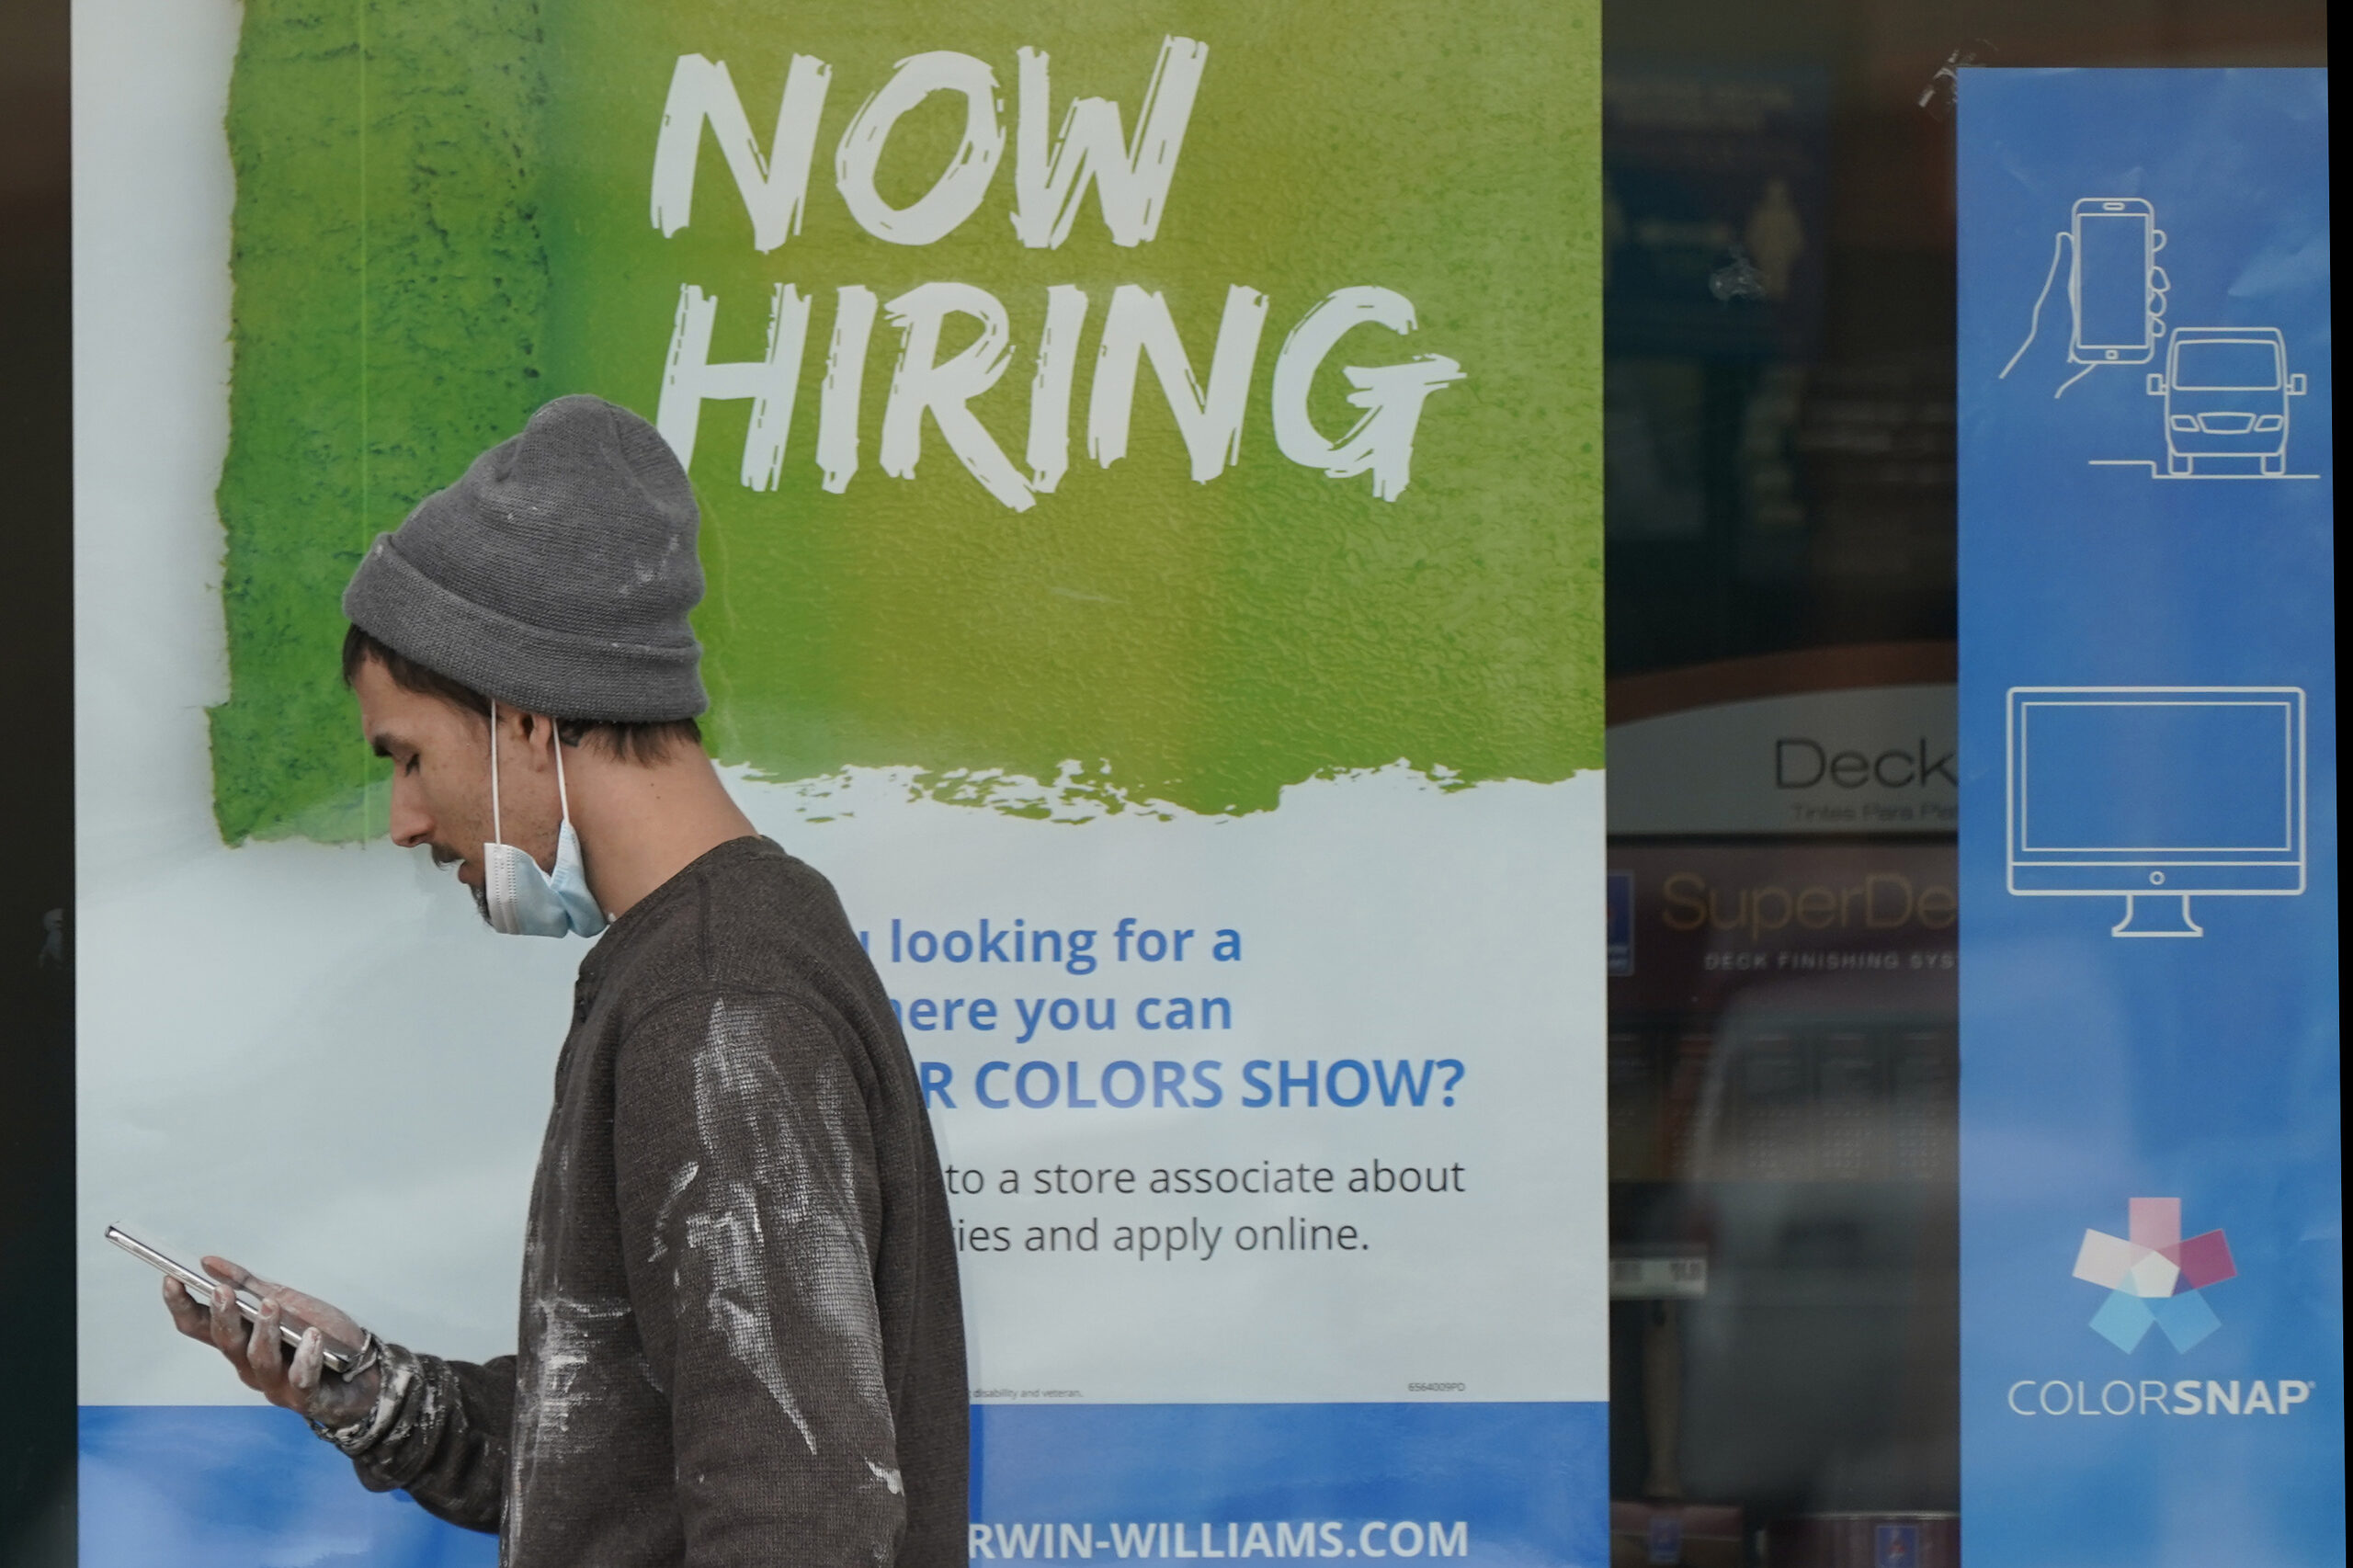 A man walks past a "Now Hiring" sign on a window at Sherwin Williams store